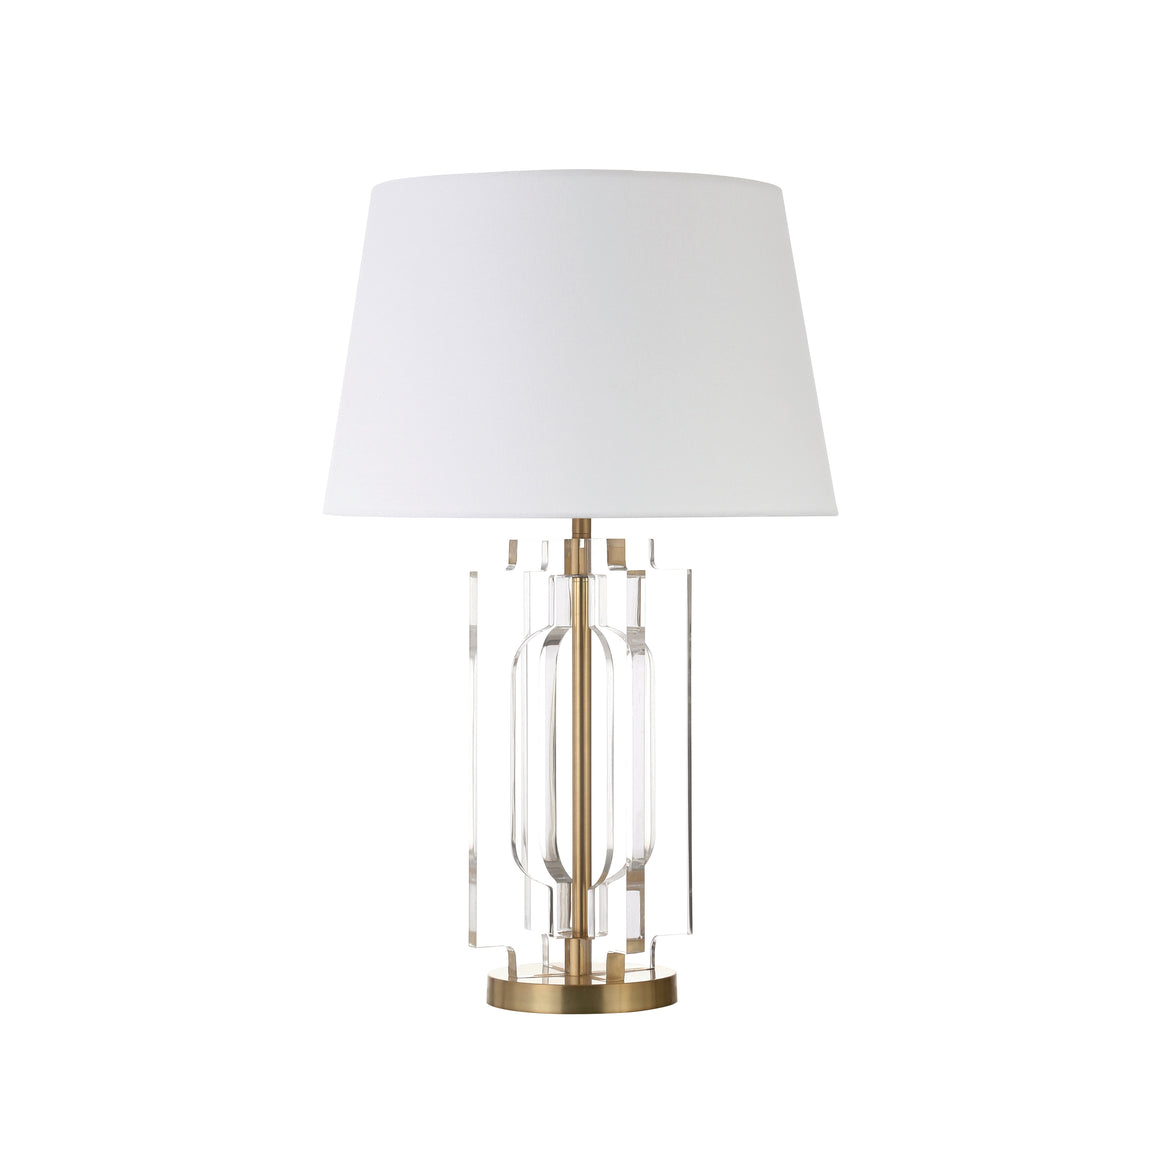 Stacked Acrylic Square Table Lamp with Antique Brass Parts